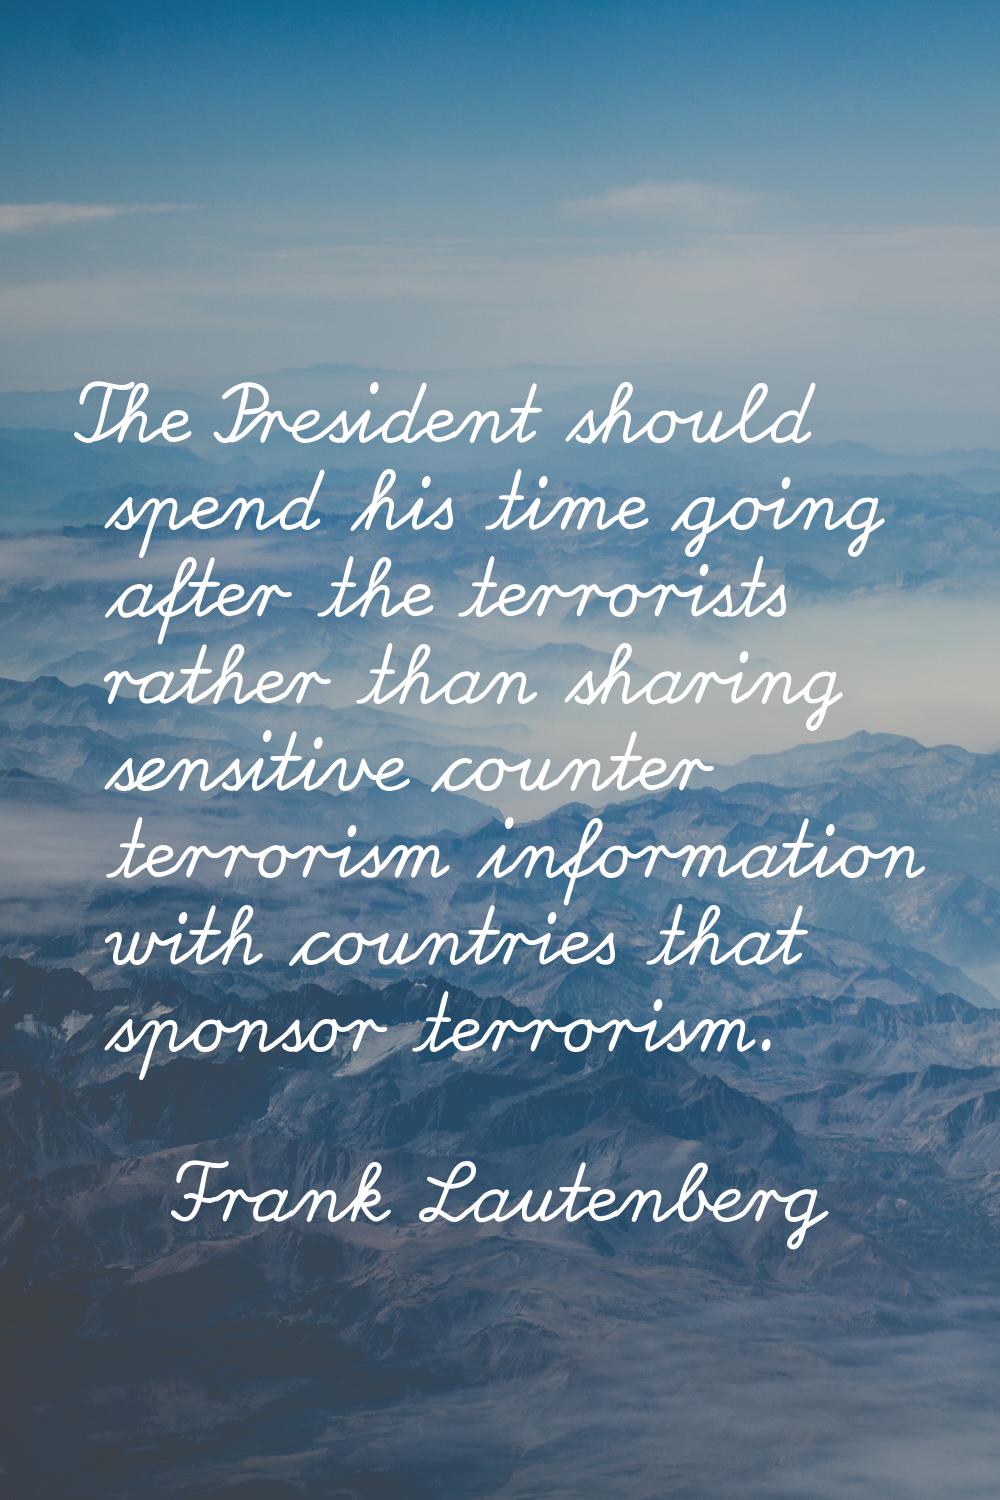 The President should spend his time going after the terrorists rather than sharing sensitive counte